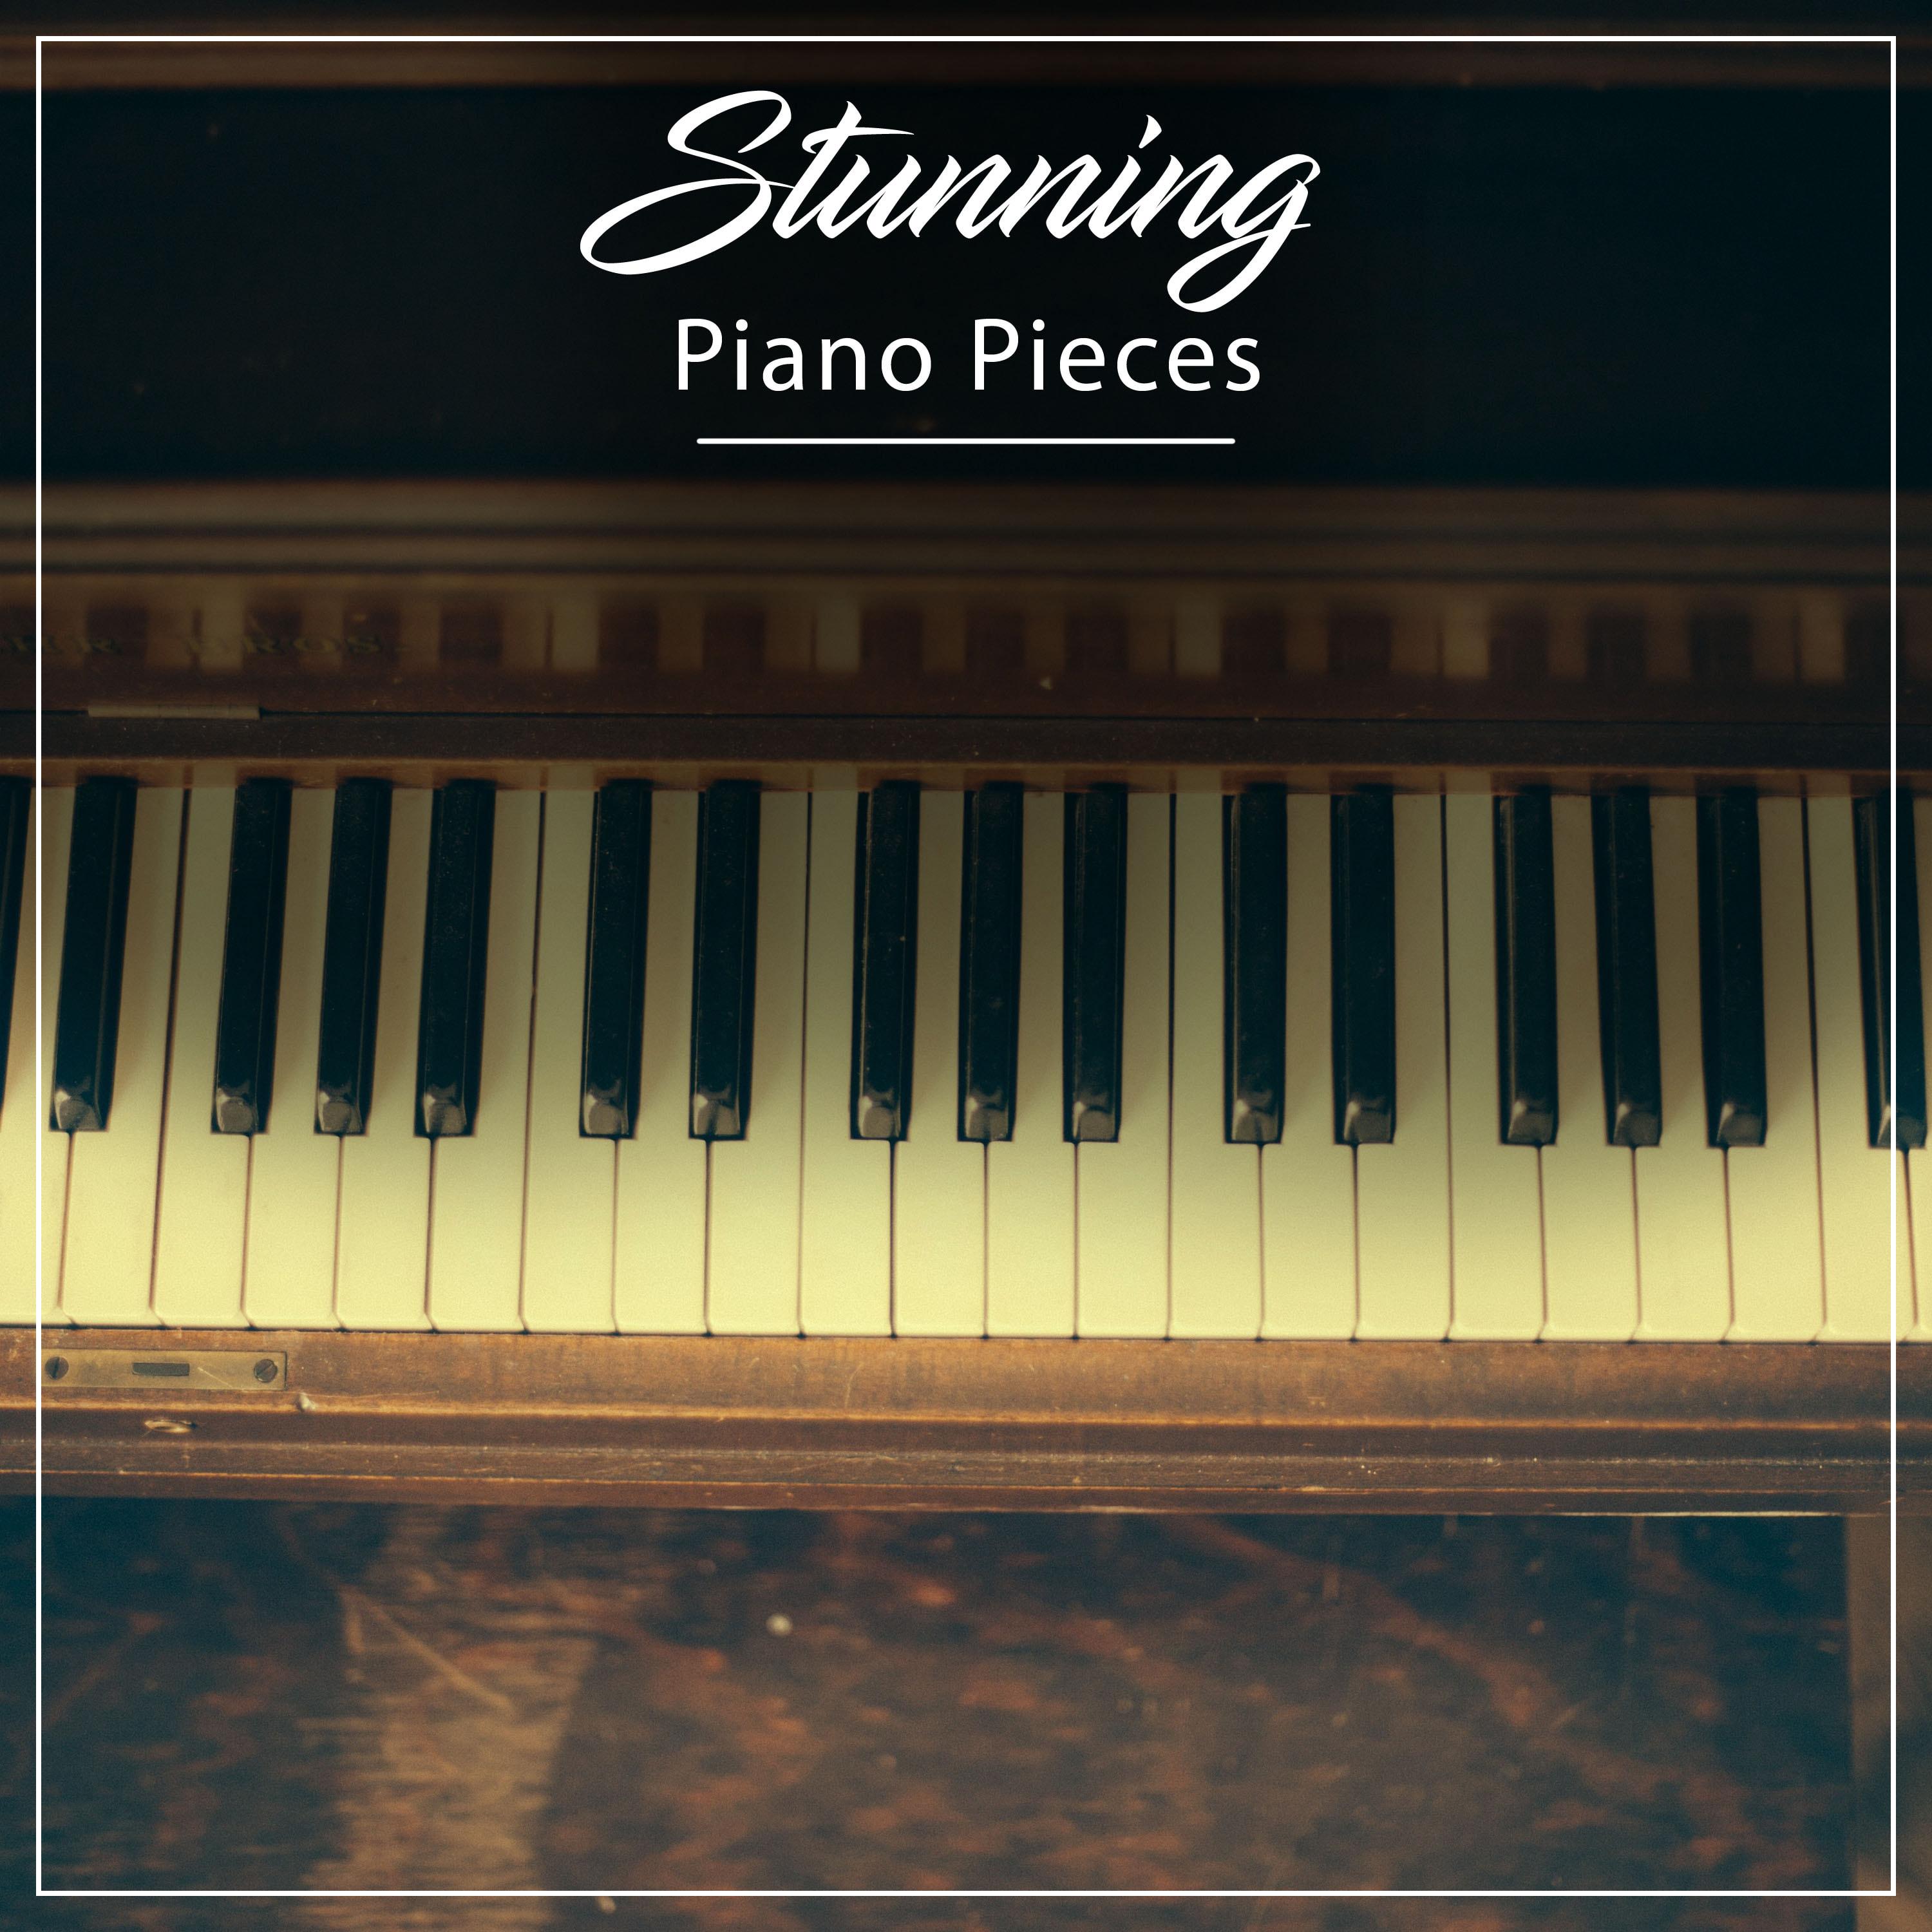 #21 Stunning Piano Pieces